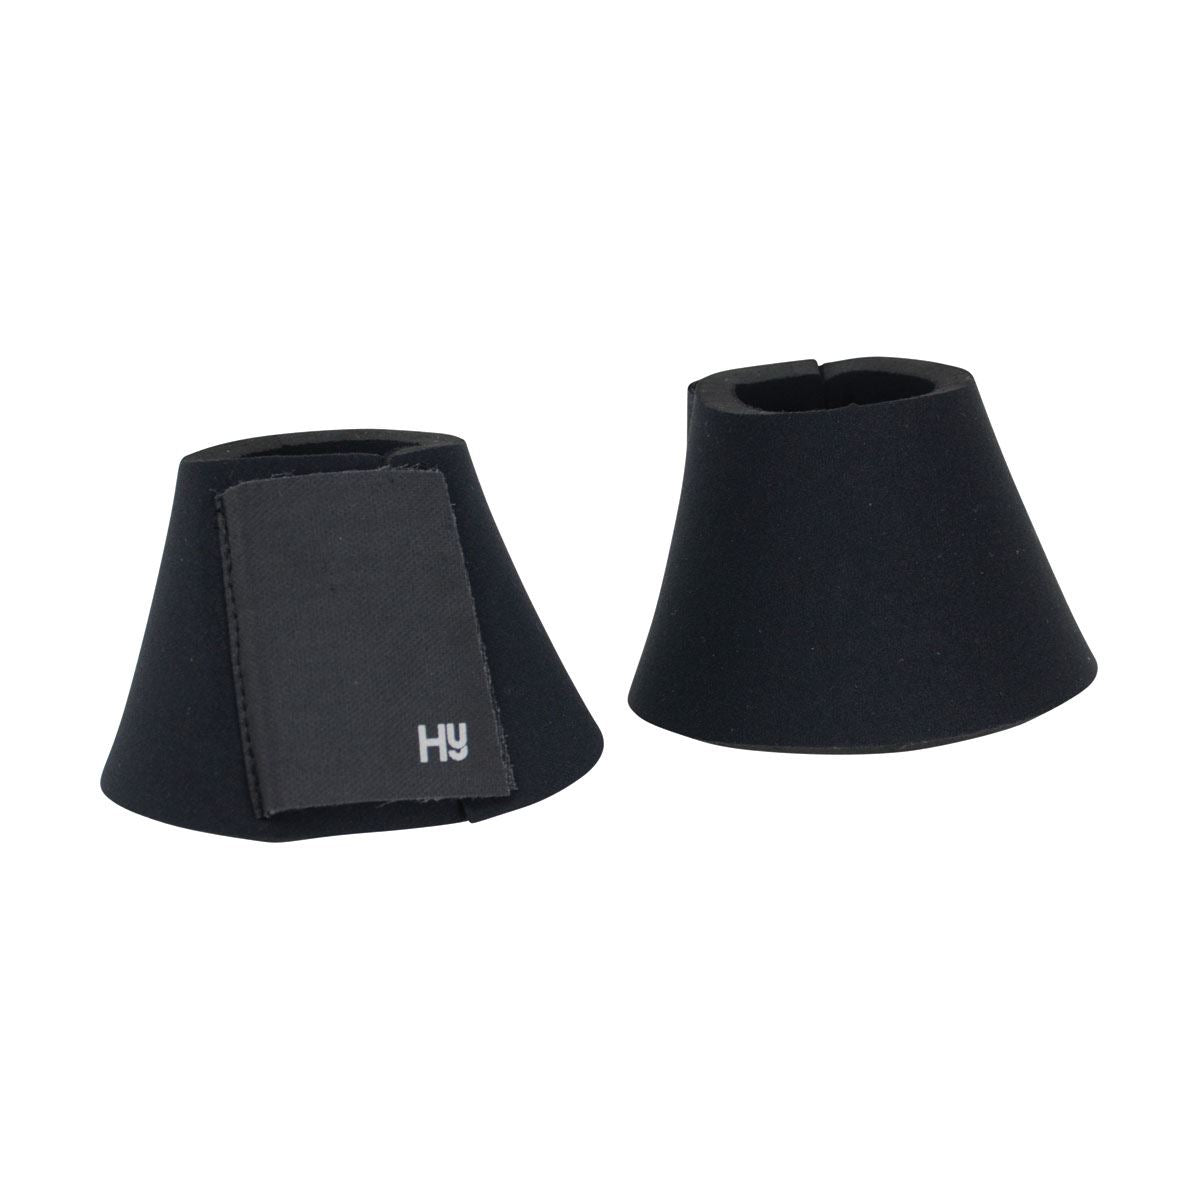 Hy Equestrian Neoprene Protect Over Reach Boots - Just Horse Riders